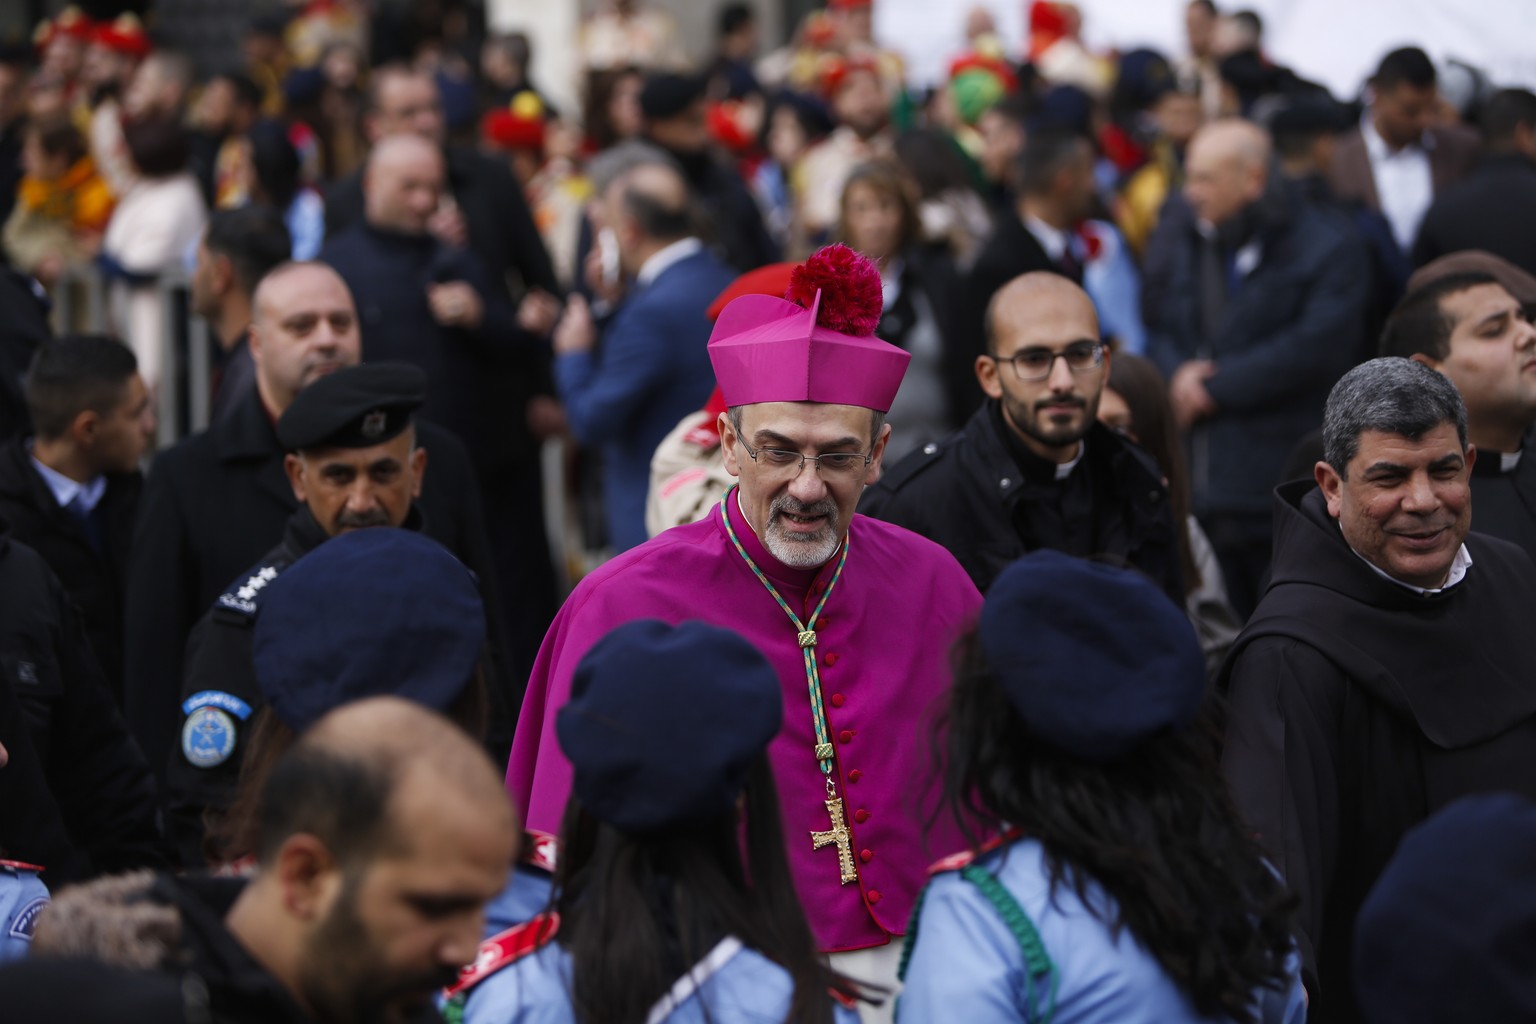 The Latin Patriarch of Jerusalem Pierbattista Pizzaballa arrives to the Church of the Nativity, built atop the site where Christians believe Jesus Christ was born, on Christmas Eve, in the West Bank C ...